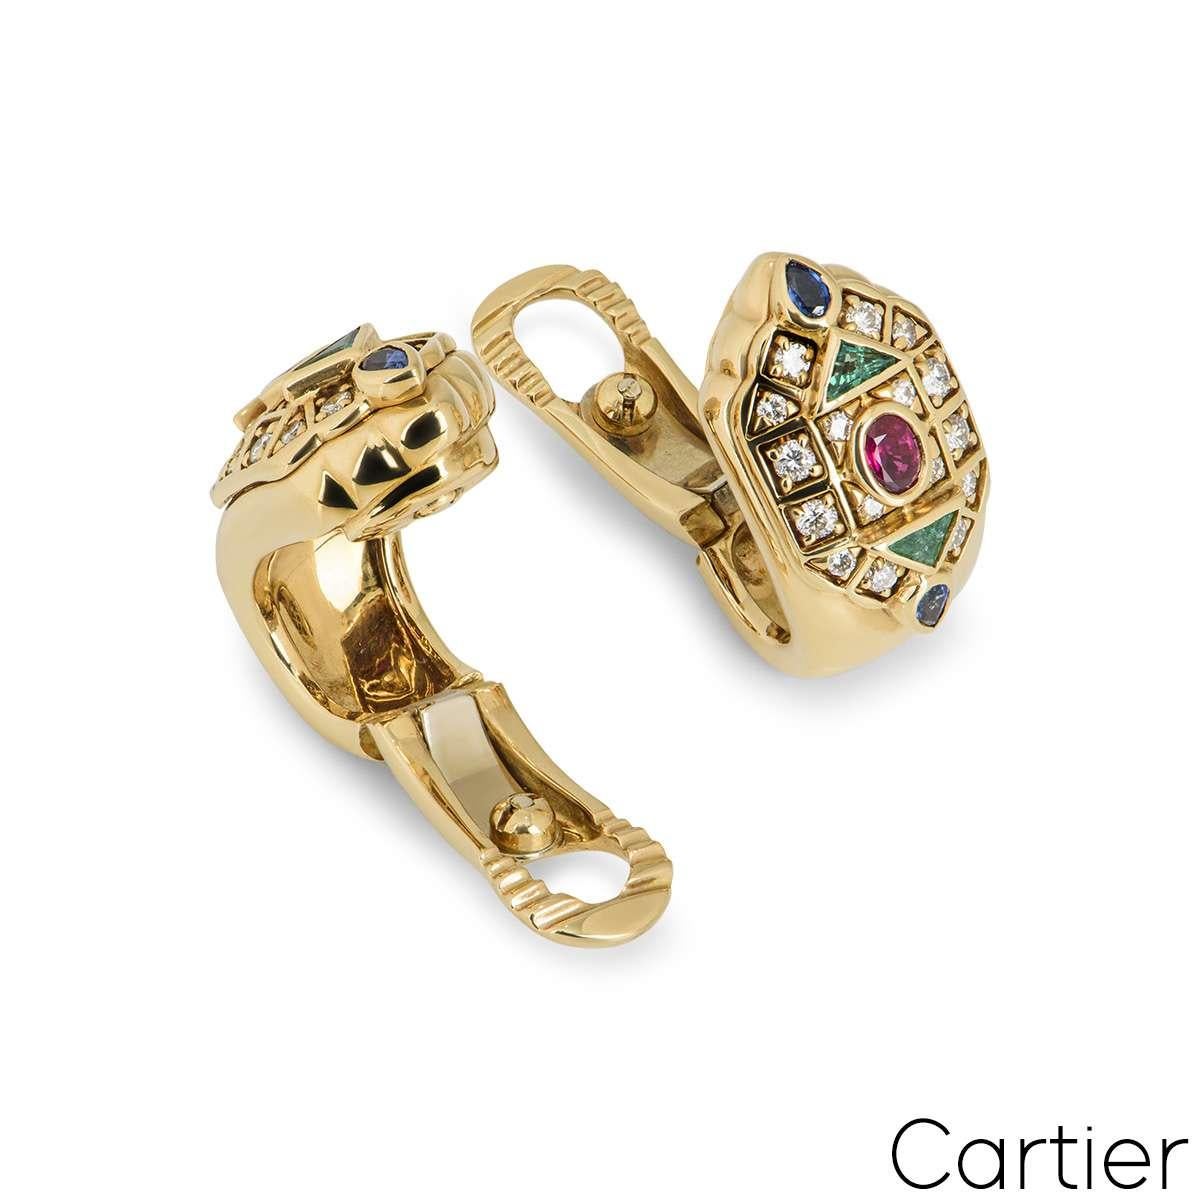 Cartier Byzantine Diamond Multi Gem Ear Clip Earrings In Excellent Condition For Sale In London, GB